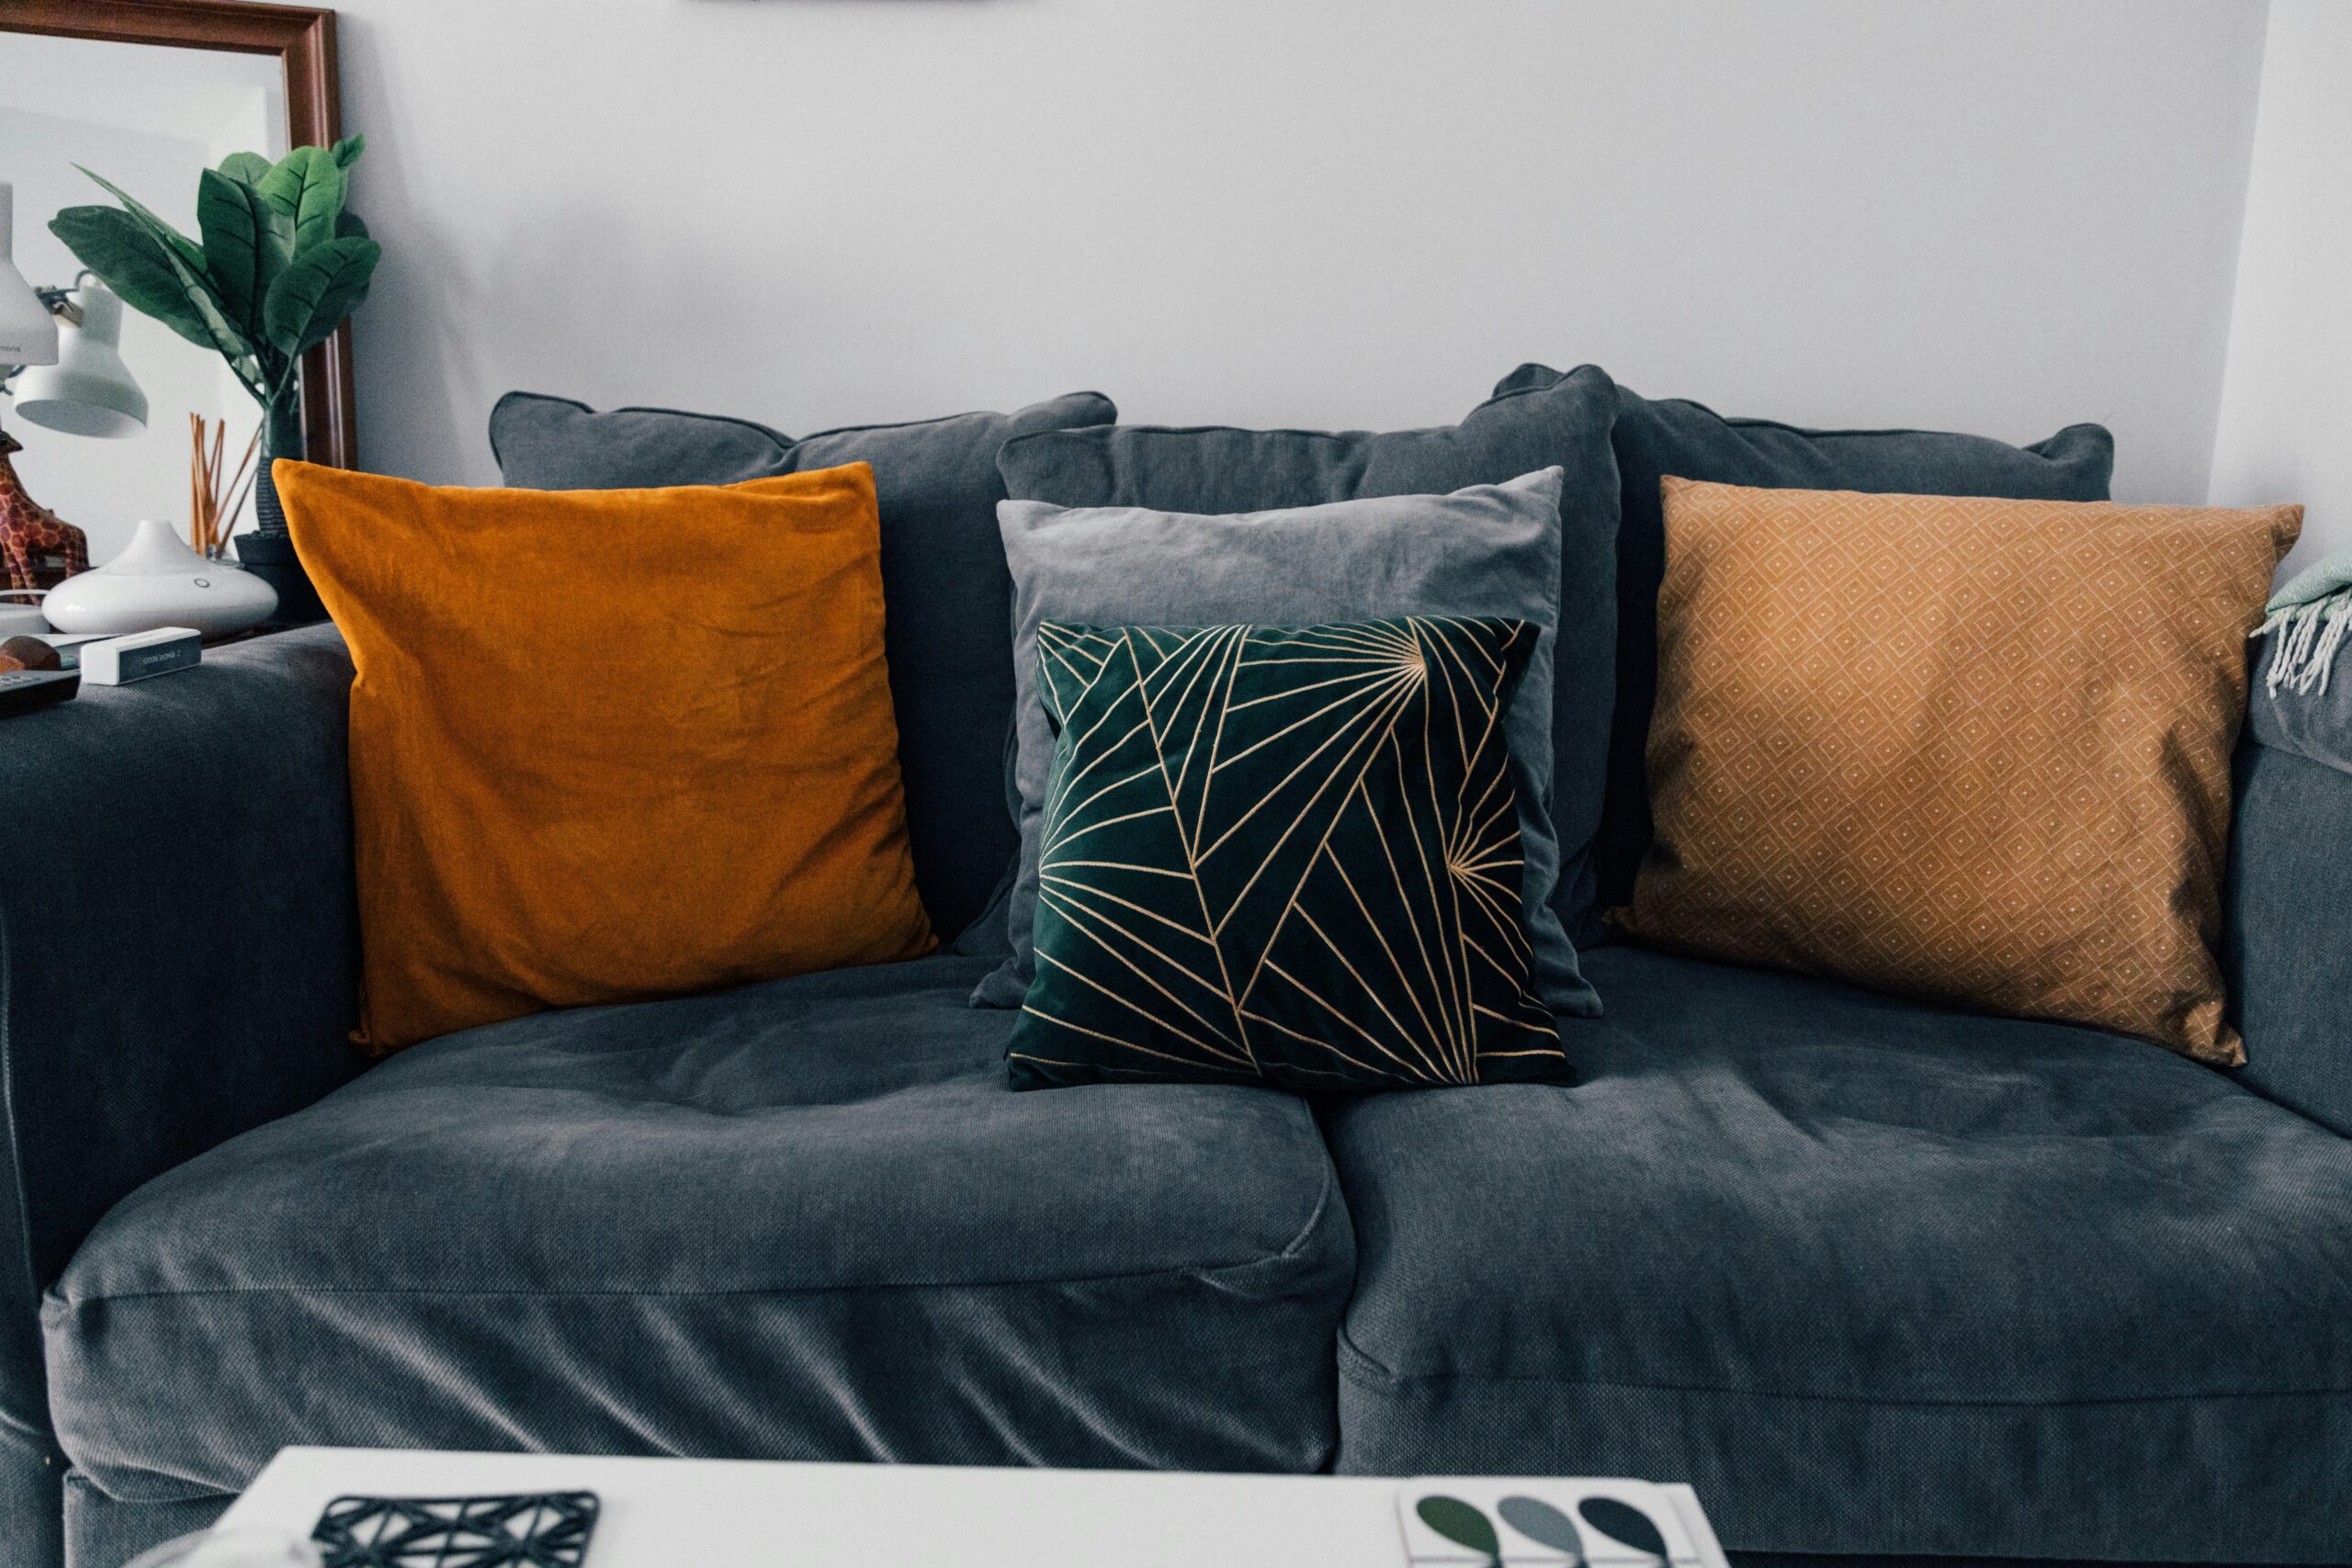 If you want to learn how to clean a velvet couch, here are a few simple steps and things you'll need. Pictured: A blue velvet couch with decorative pillows